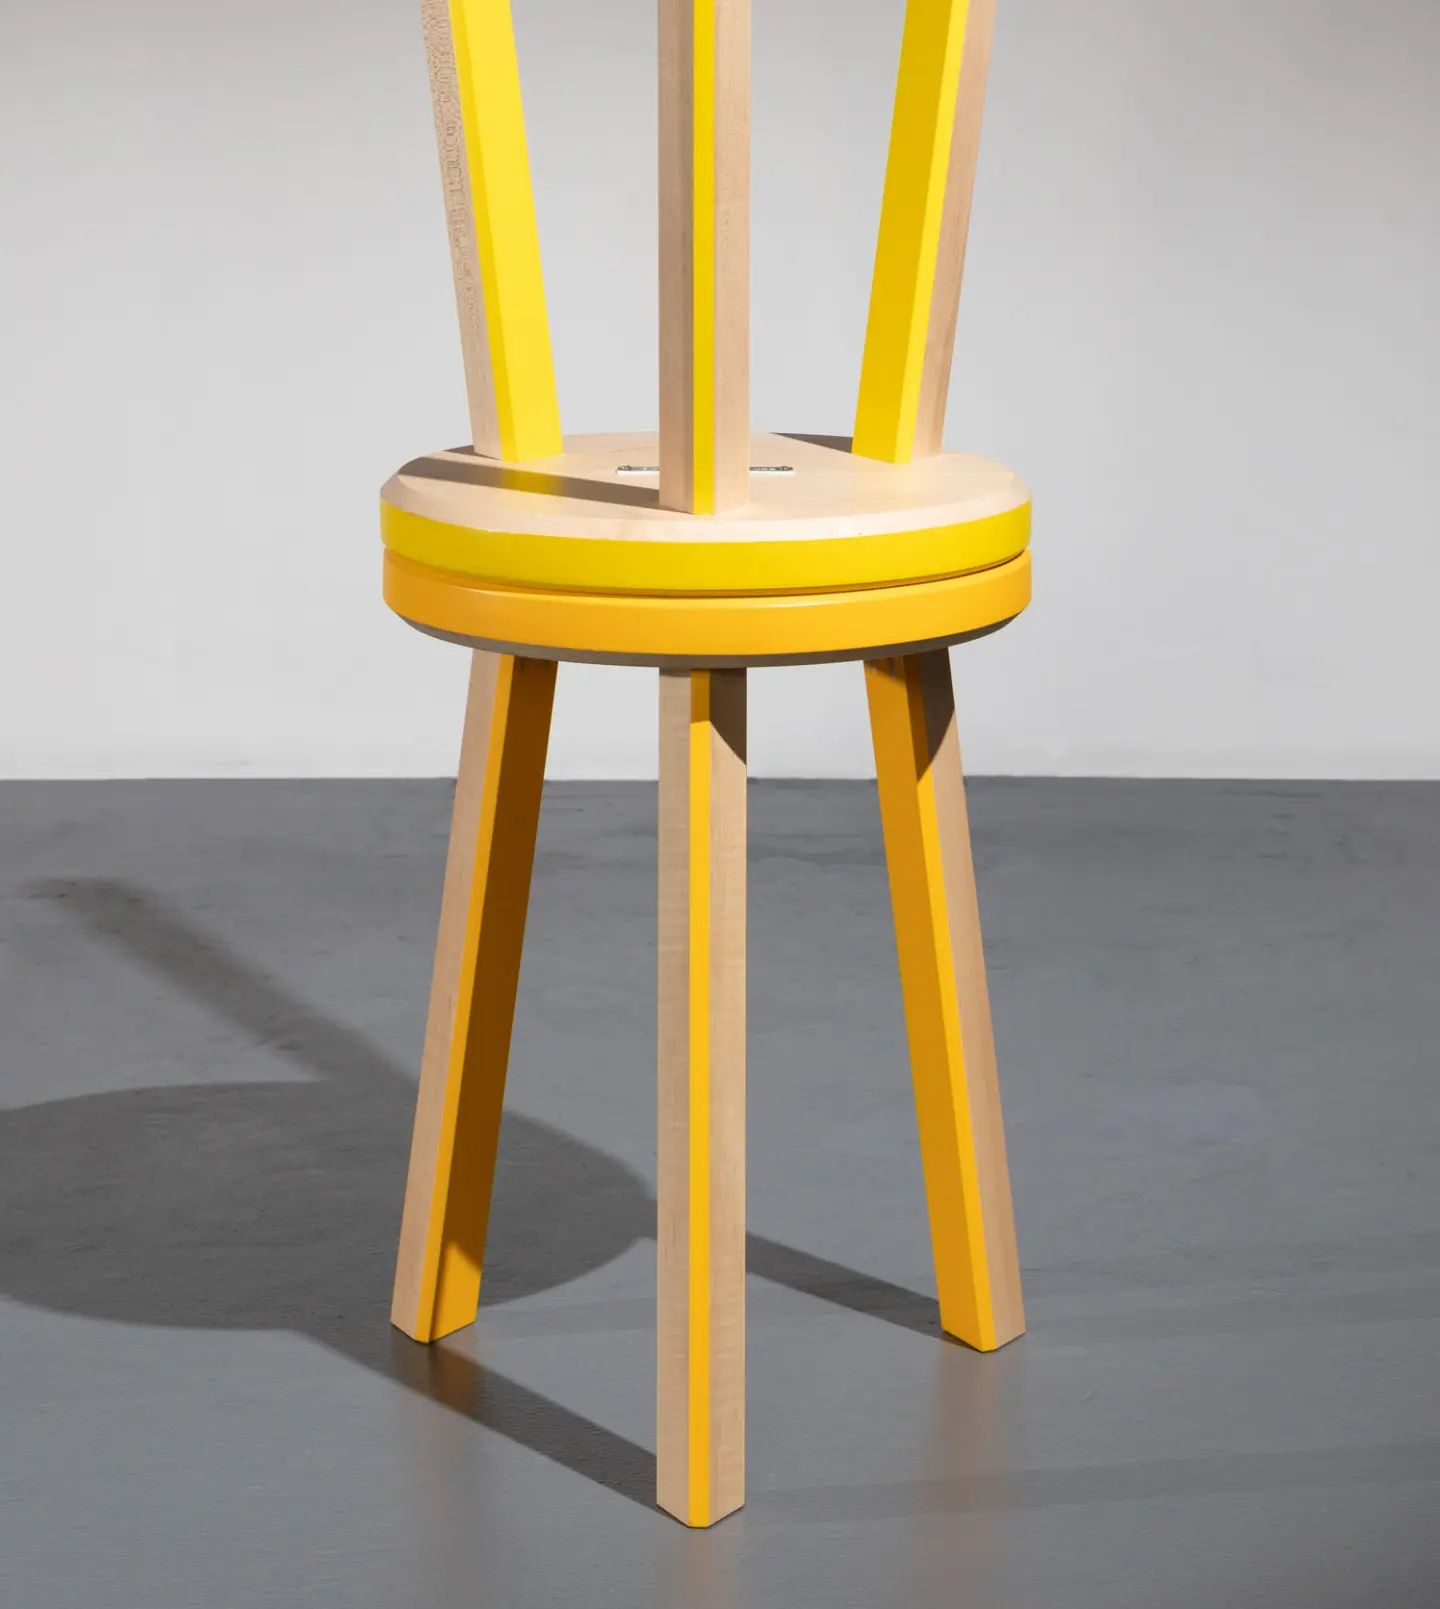 Adding some color to the feed. Yellow - Orange combo, Trio Stools 19" chair height. 
#stool #chair #seating #sidetable #furniture #design #modern #color #creative #accessories #accent #interiors #interior123 #interiordesign #decoration #designinspo #designideas #interiorstyle